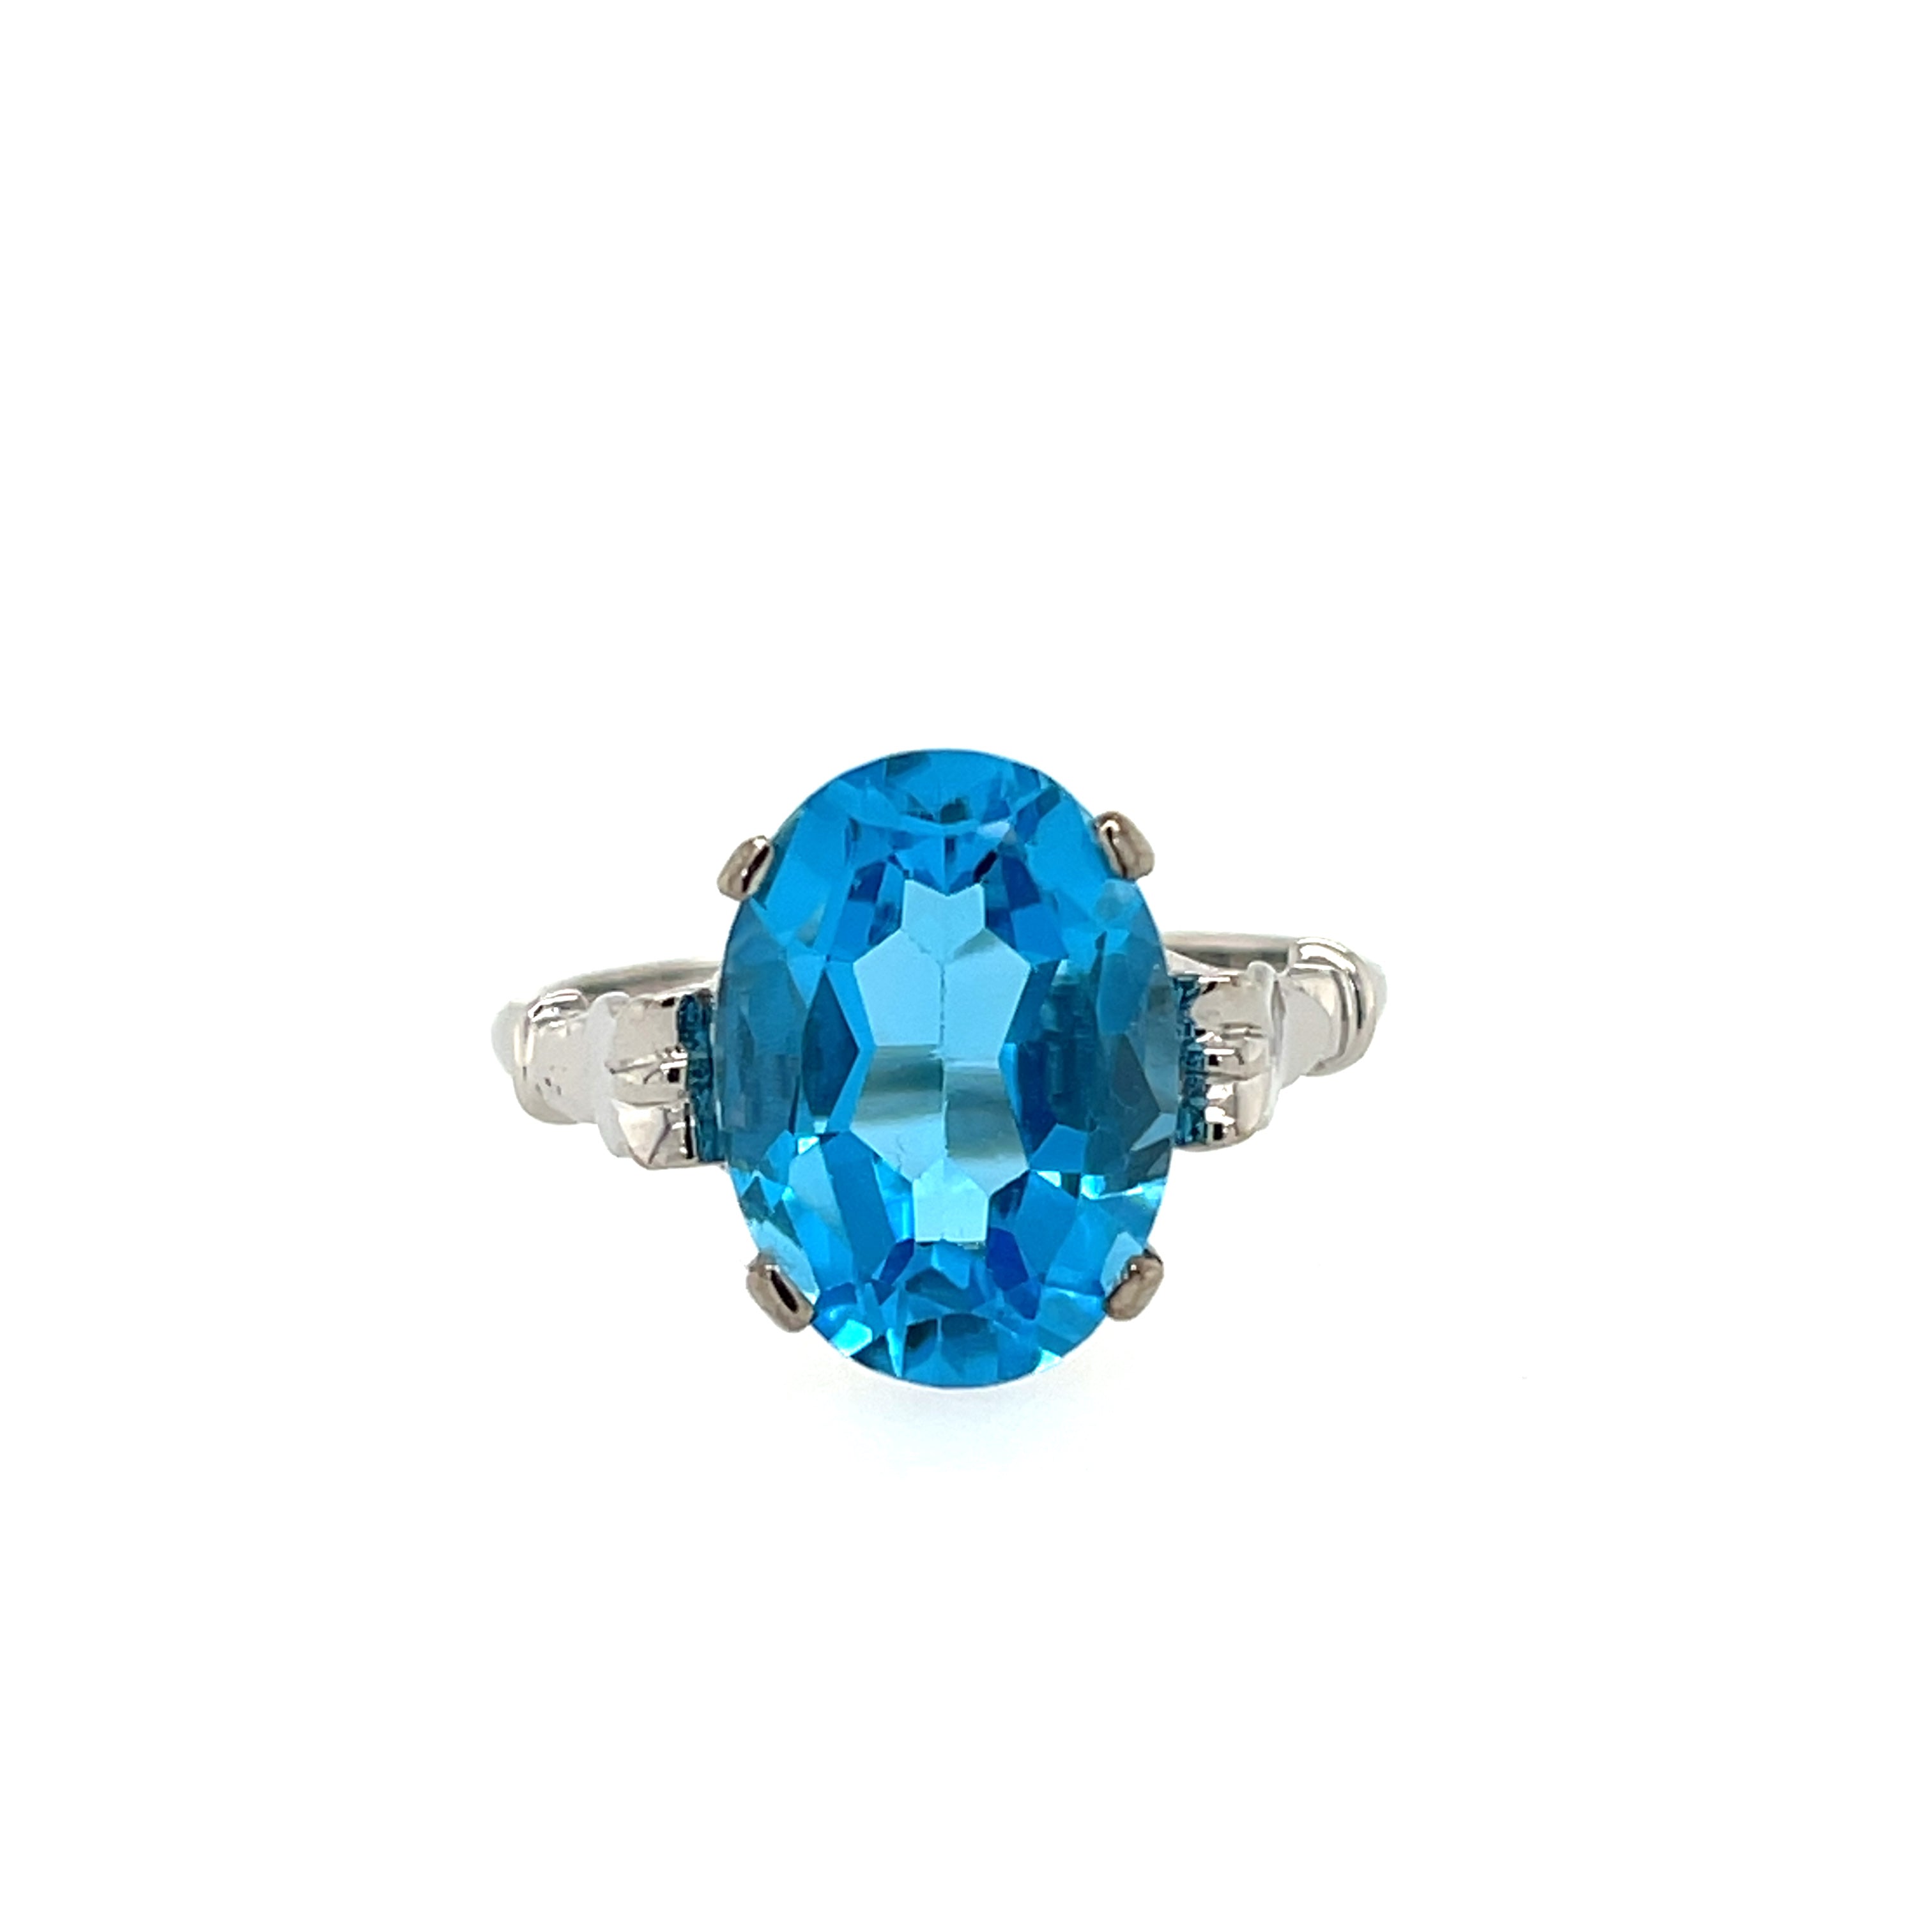 18ct White Gold 7.62ct Oval Blue Topaz Dress Ring